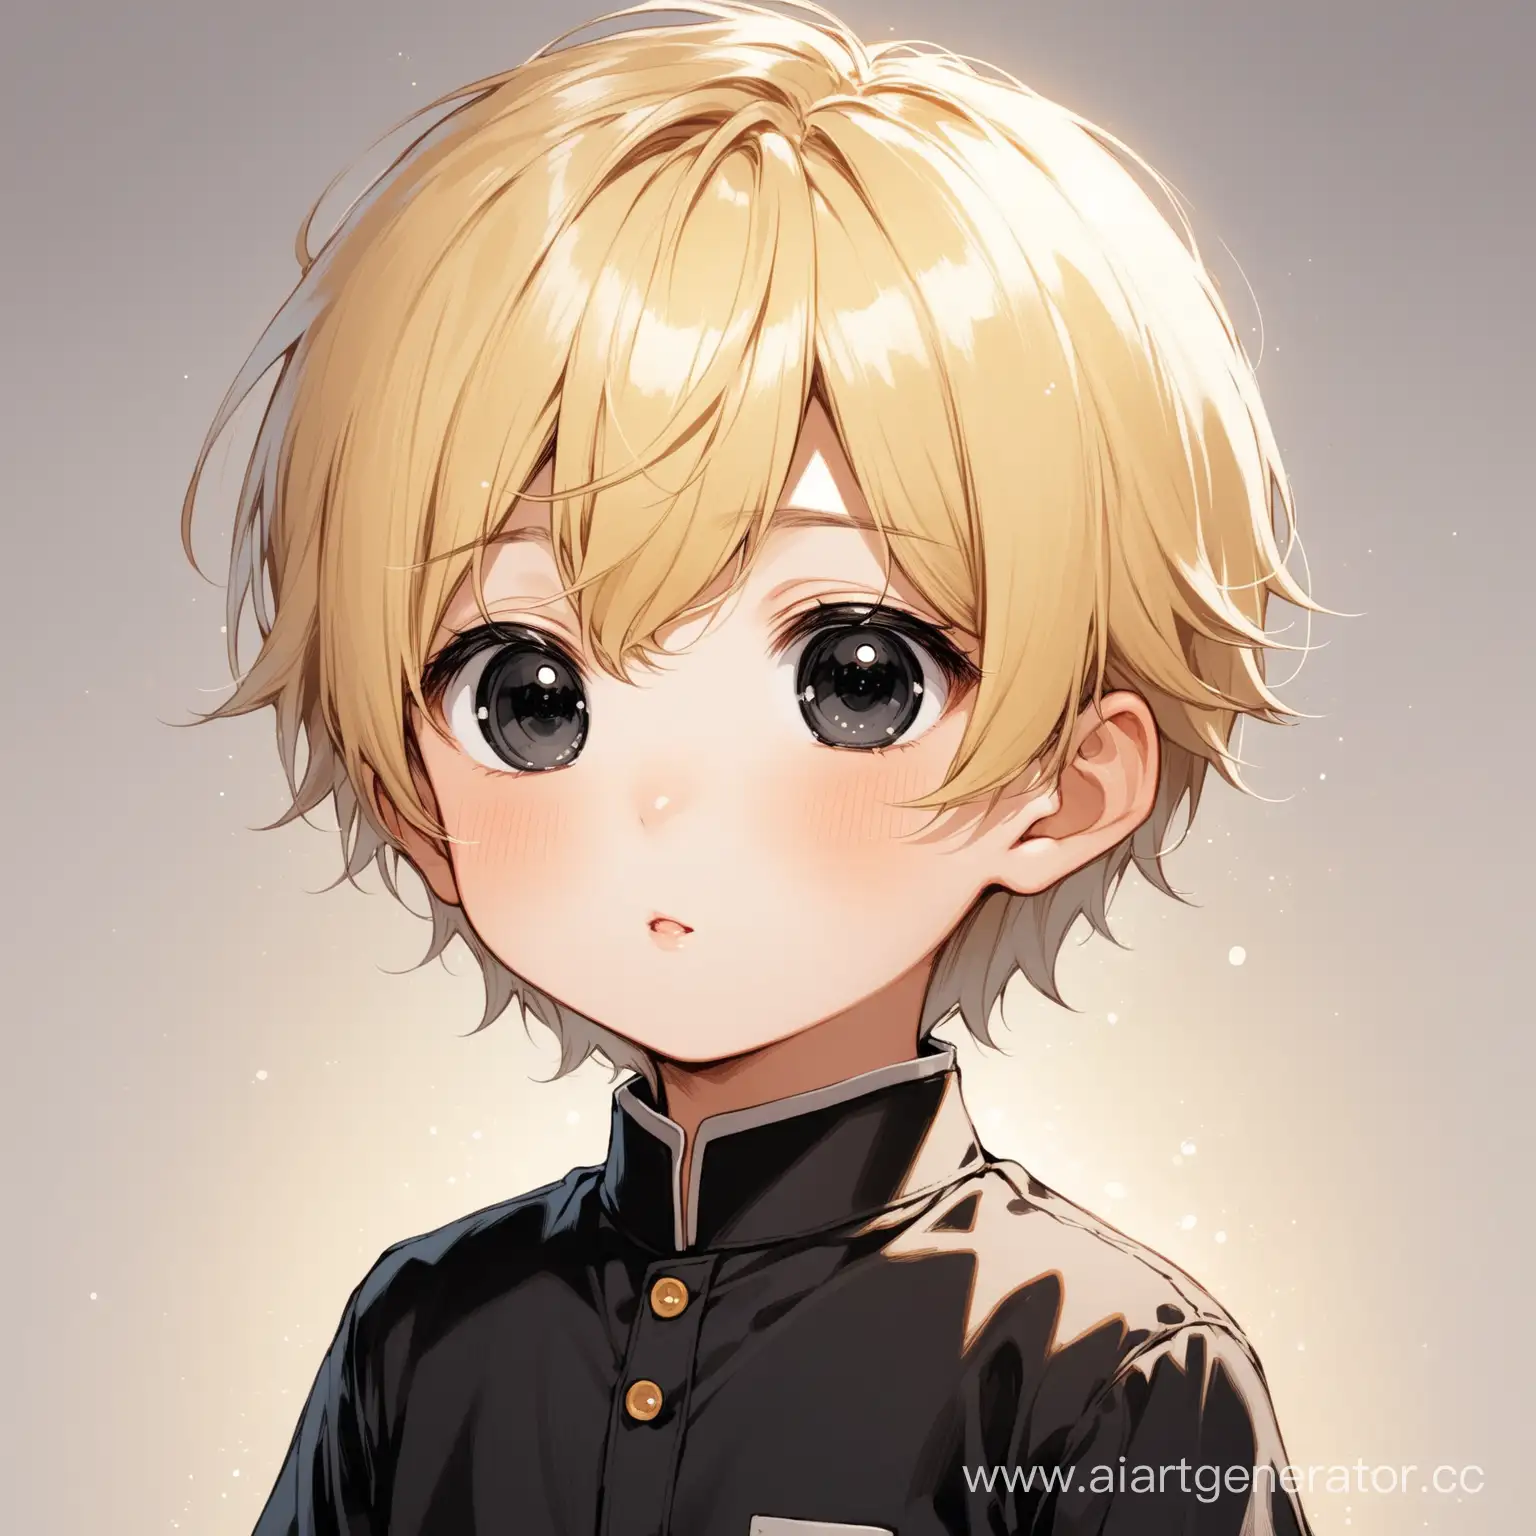 Adorable-Little-Boy-with-Short-Blond-Hair-and-Black-Eyes